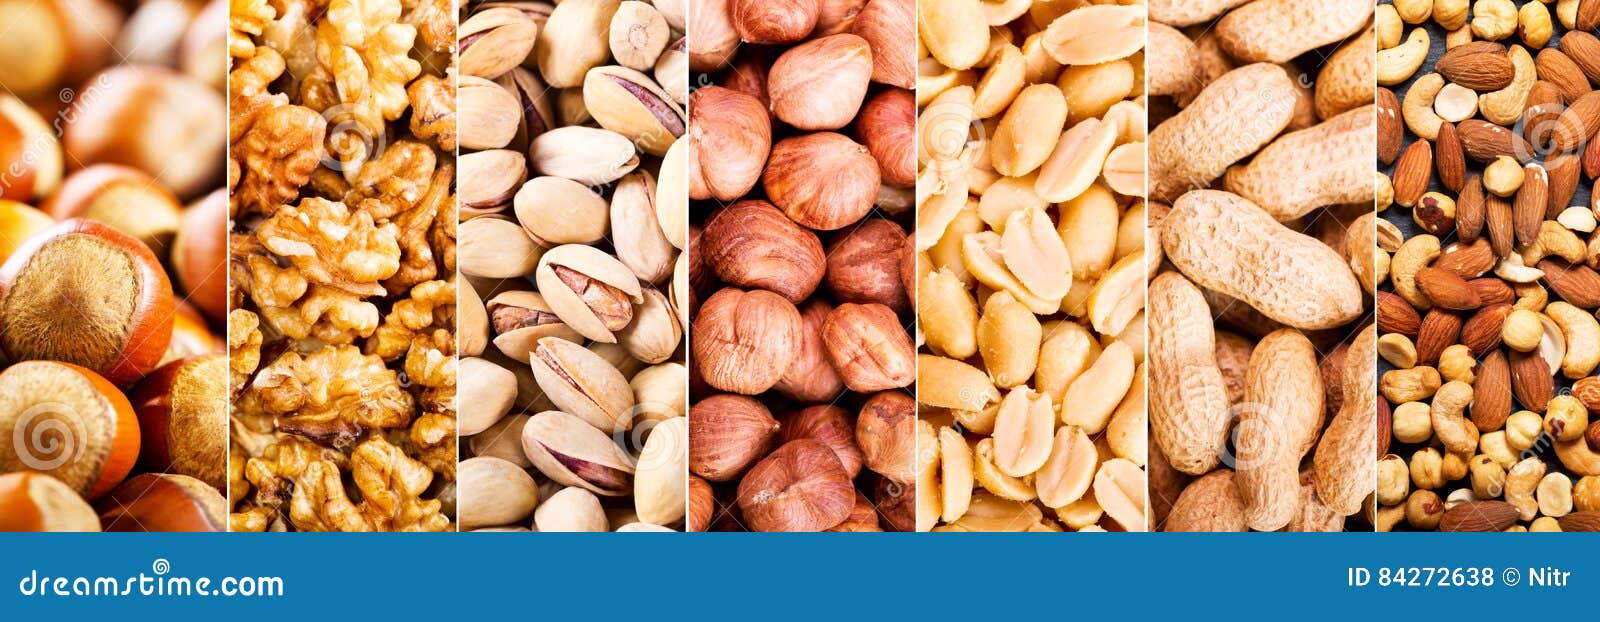 collage of mixed nuts